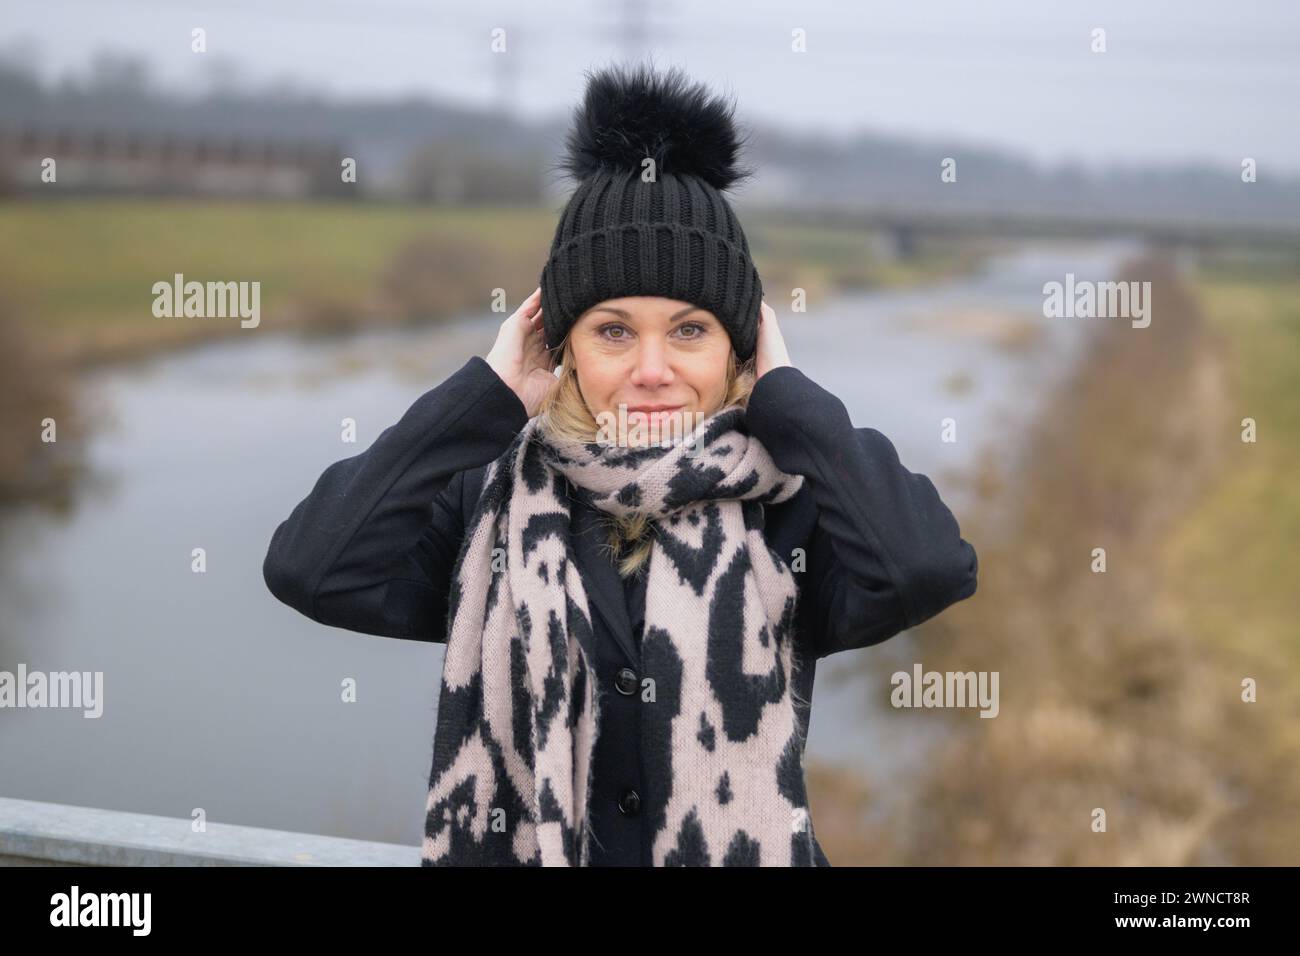 Blonde lady wearing a black coat jacket and black bobble hat holding with her hands while standing on a bridge Stock Photo